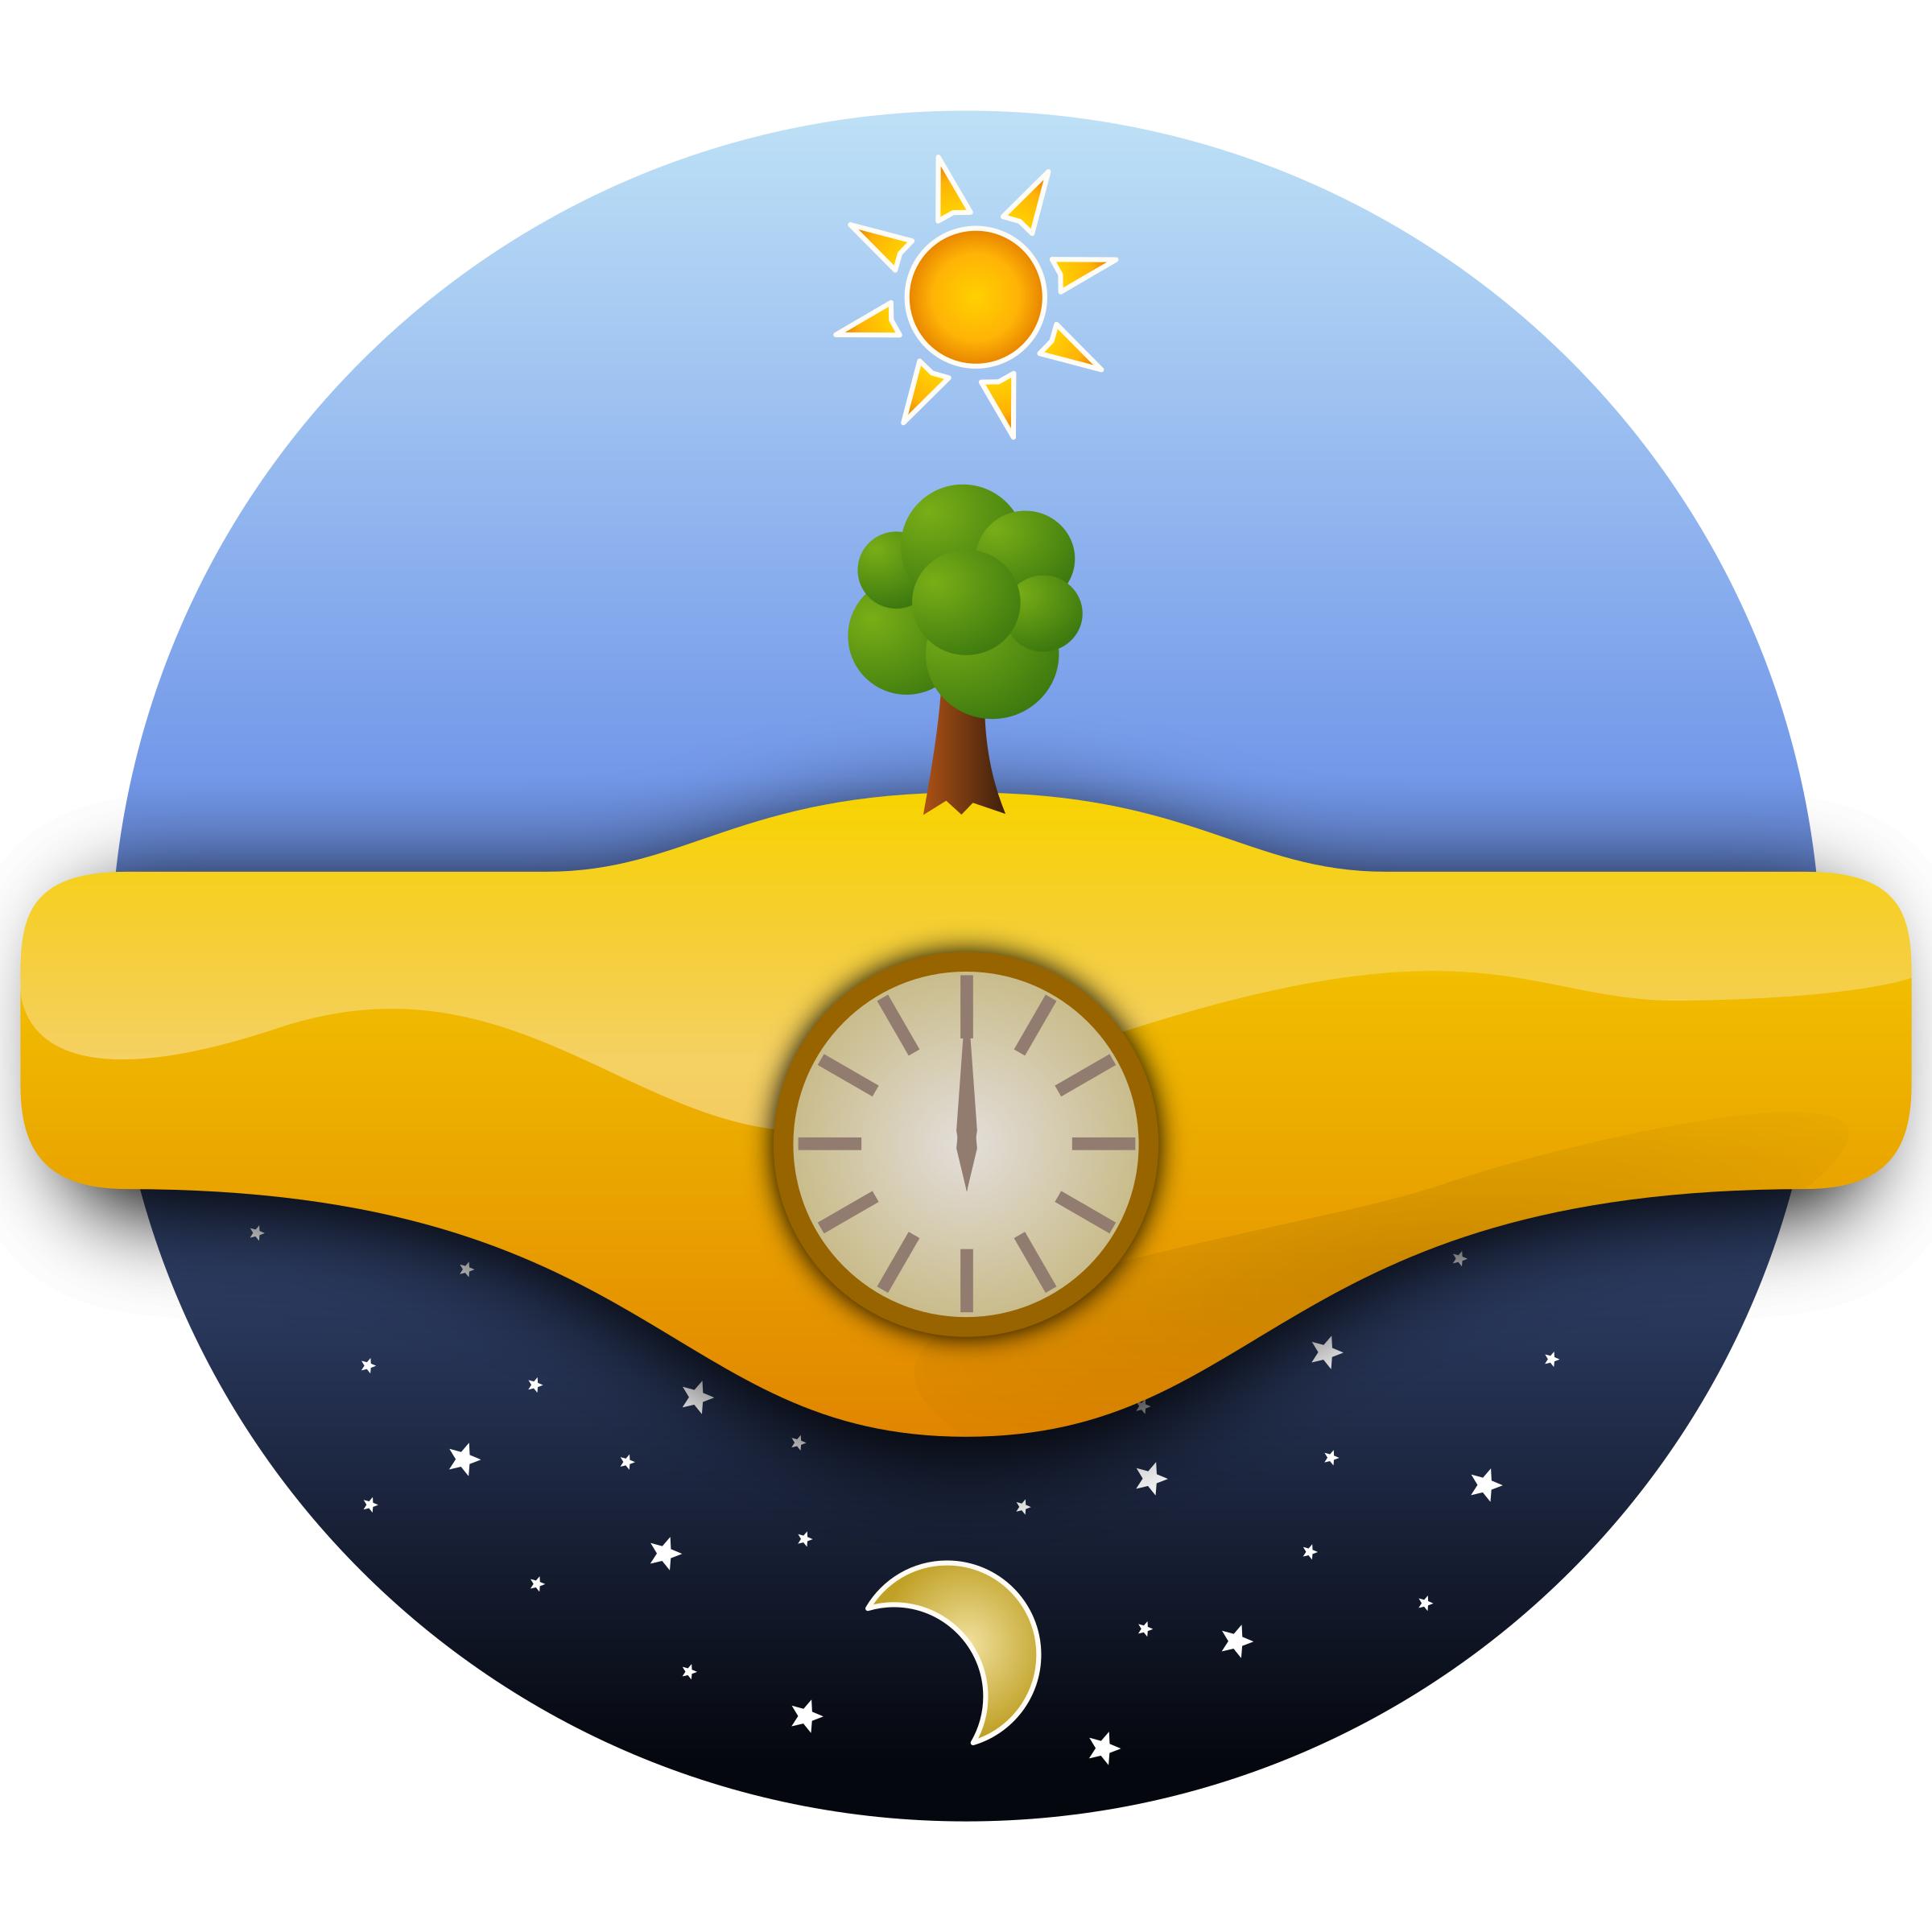 giorno e notte - night and day icons